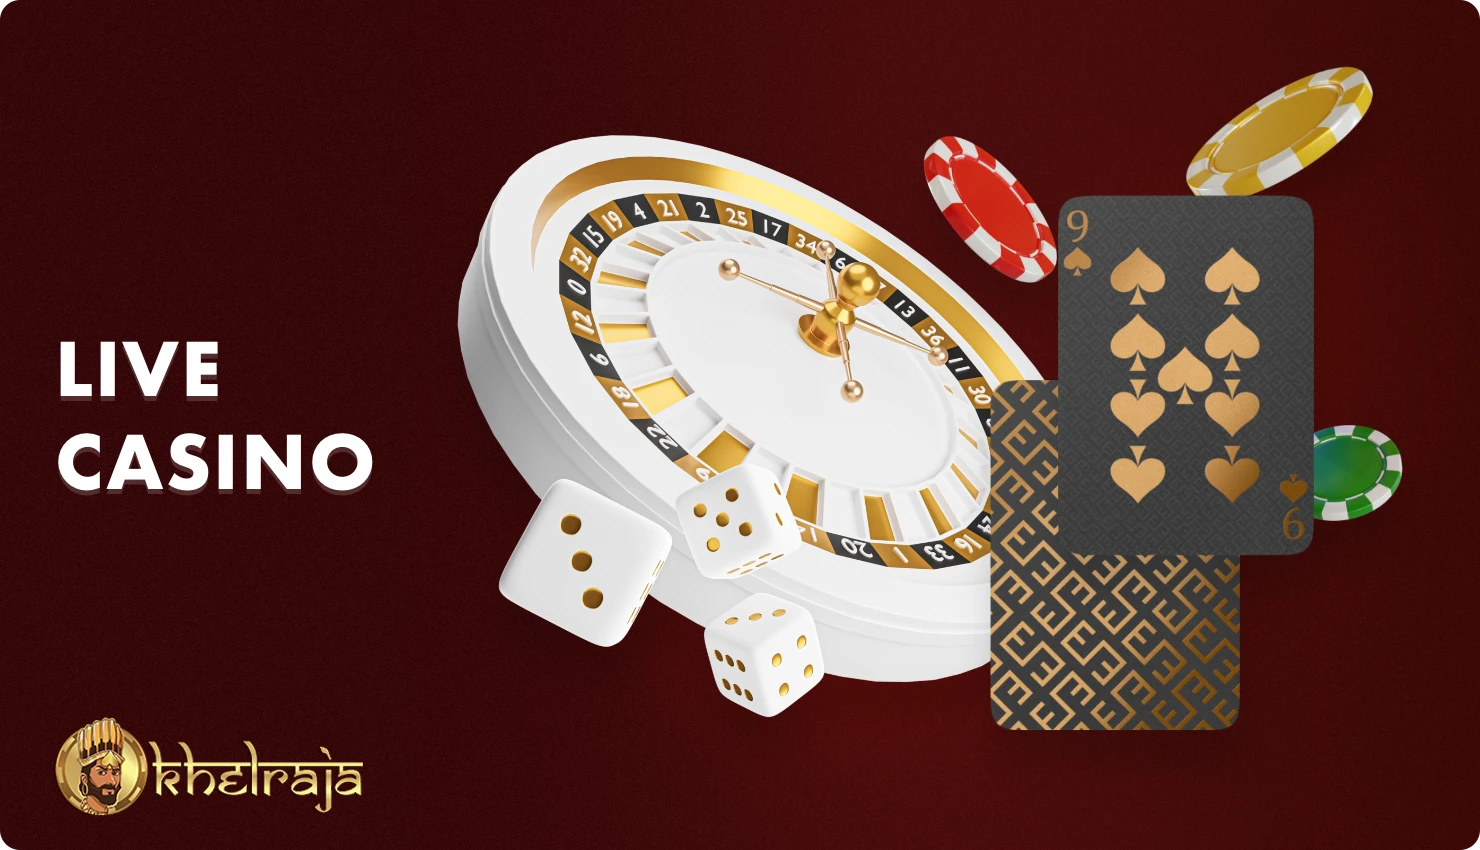 At Khelraja live casino, players have access to a variety of popular live croupier entertainment